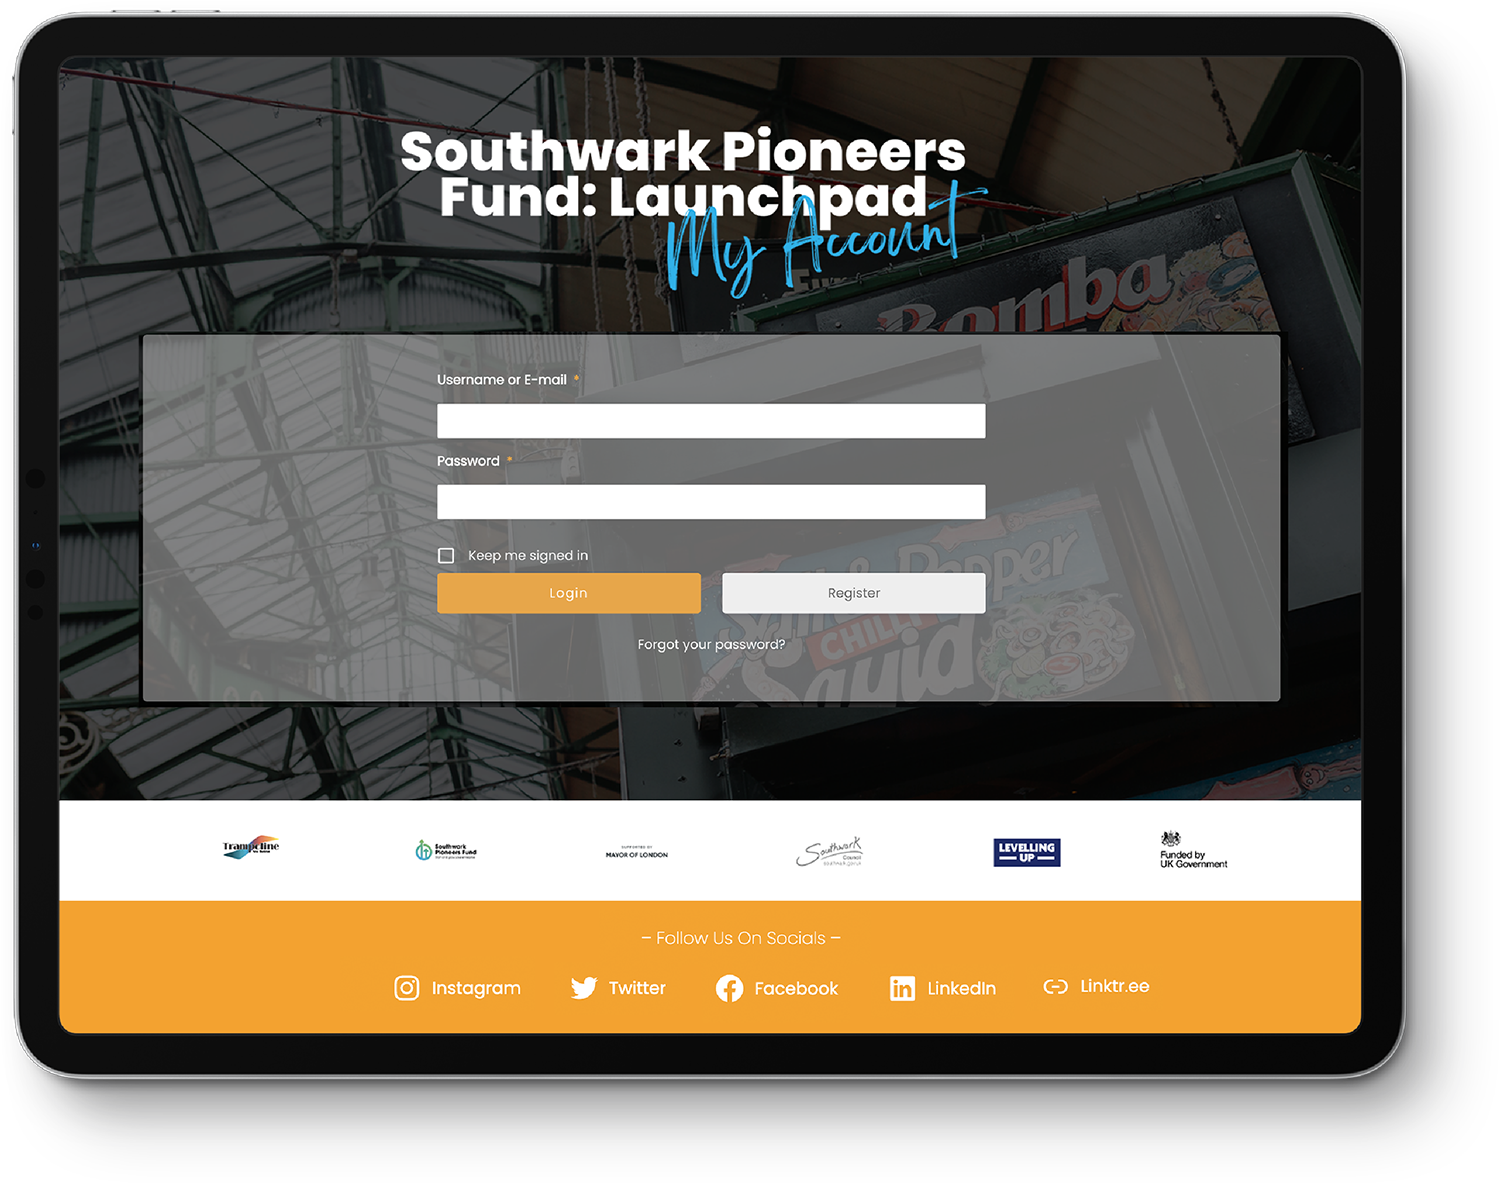 An iPad displaying the login page for the Launchpad account portal.